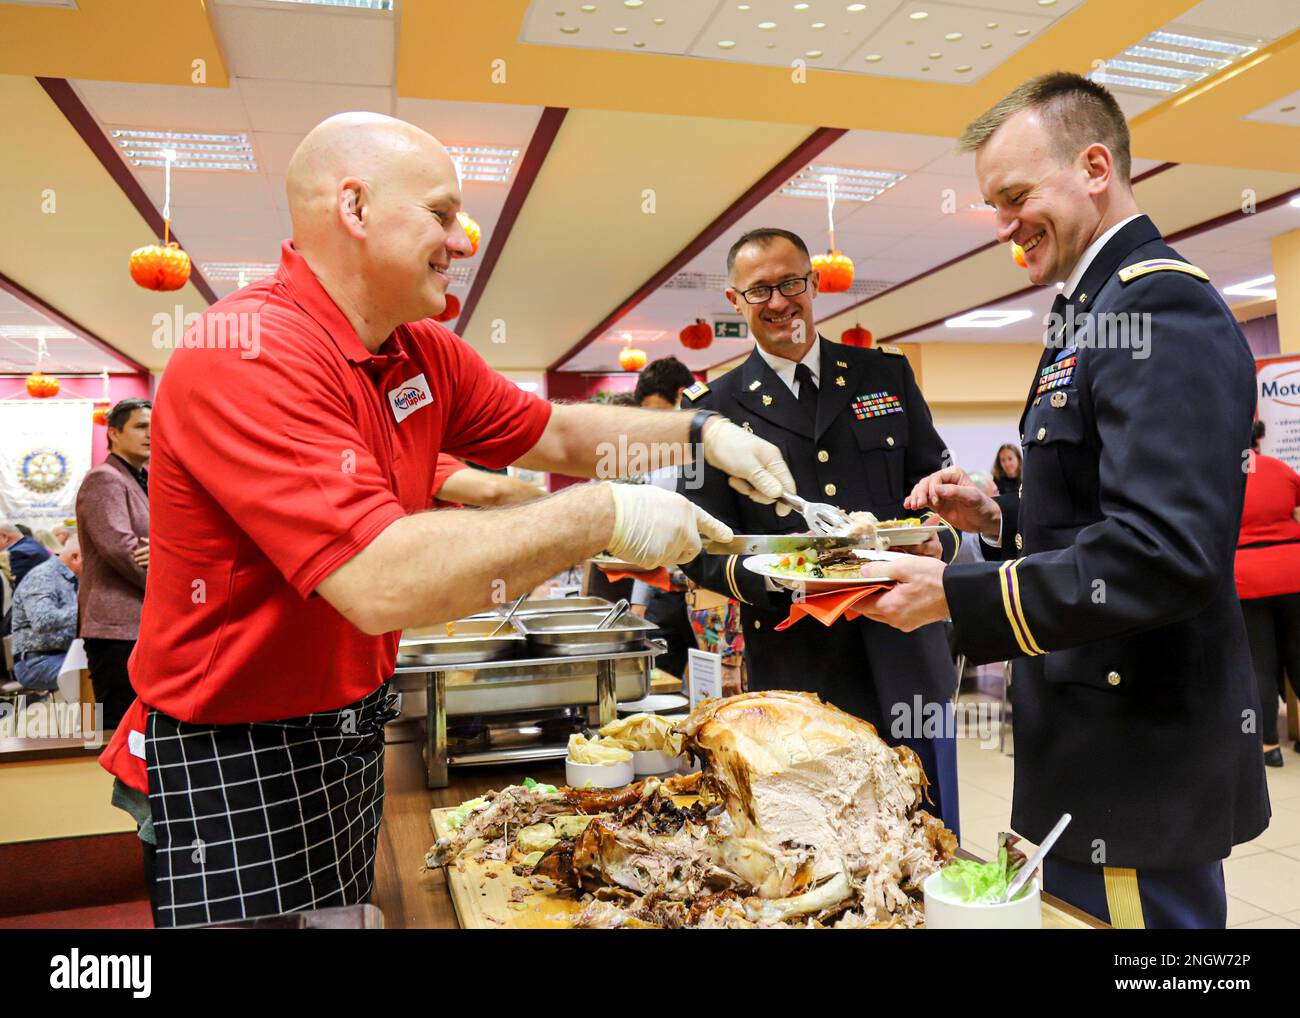 MARTIN, Slovakia - U.S. Army V Corps Maj. Steve Szrom, a Civil Affairs officer from Valparaiso, Indiana, holds up his plate to receive a slice of turkey as V Corps Capt. Robert Pavlovic, a Civil Affairs officer assigned to 418th Civil Affairs Battalion based out of Belton, Missouri, observes during Rotary International Club Martin’s Thanksgiving dinner, Martin, Slovakia, Nov. 24, 2022. Local community leaders representing the Rotary International Club invited U.S. Army V Corps Civil Affairs Soldiers from Camp Kosciuszko, Poland, to a Thanksgiving event to further promote, understand and celebr Stock Photo